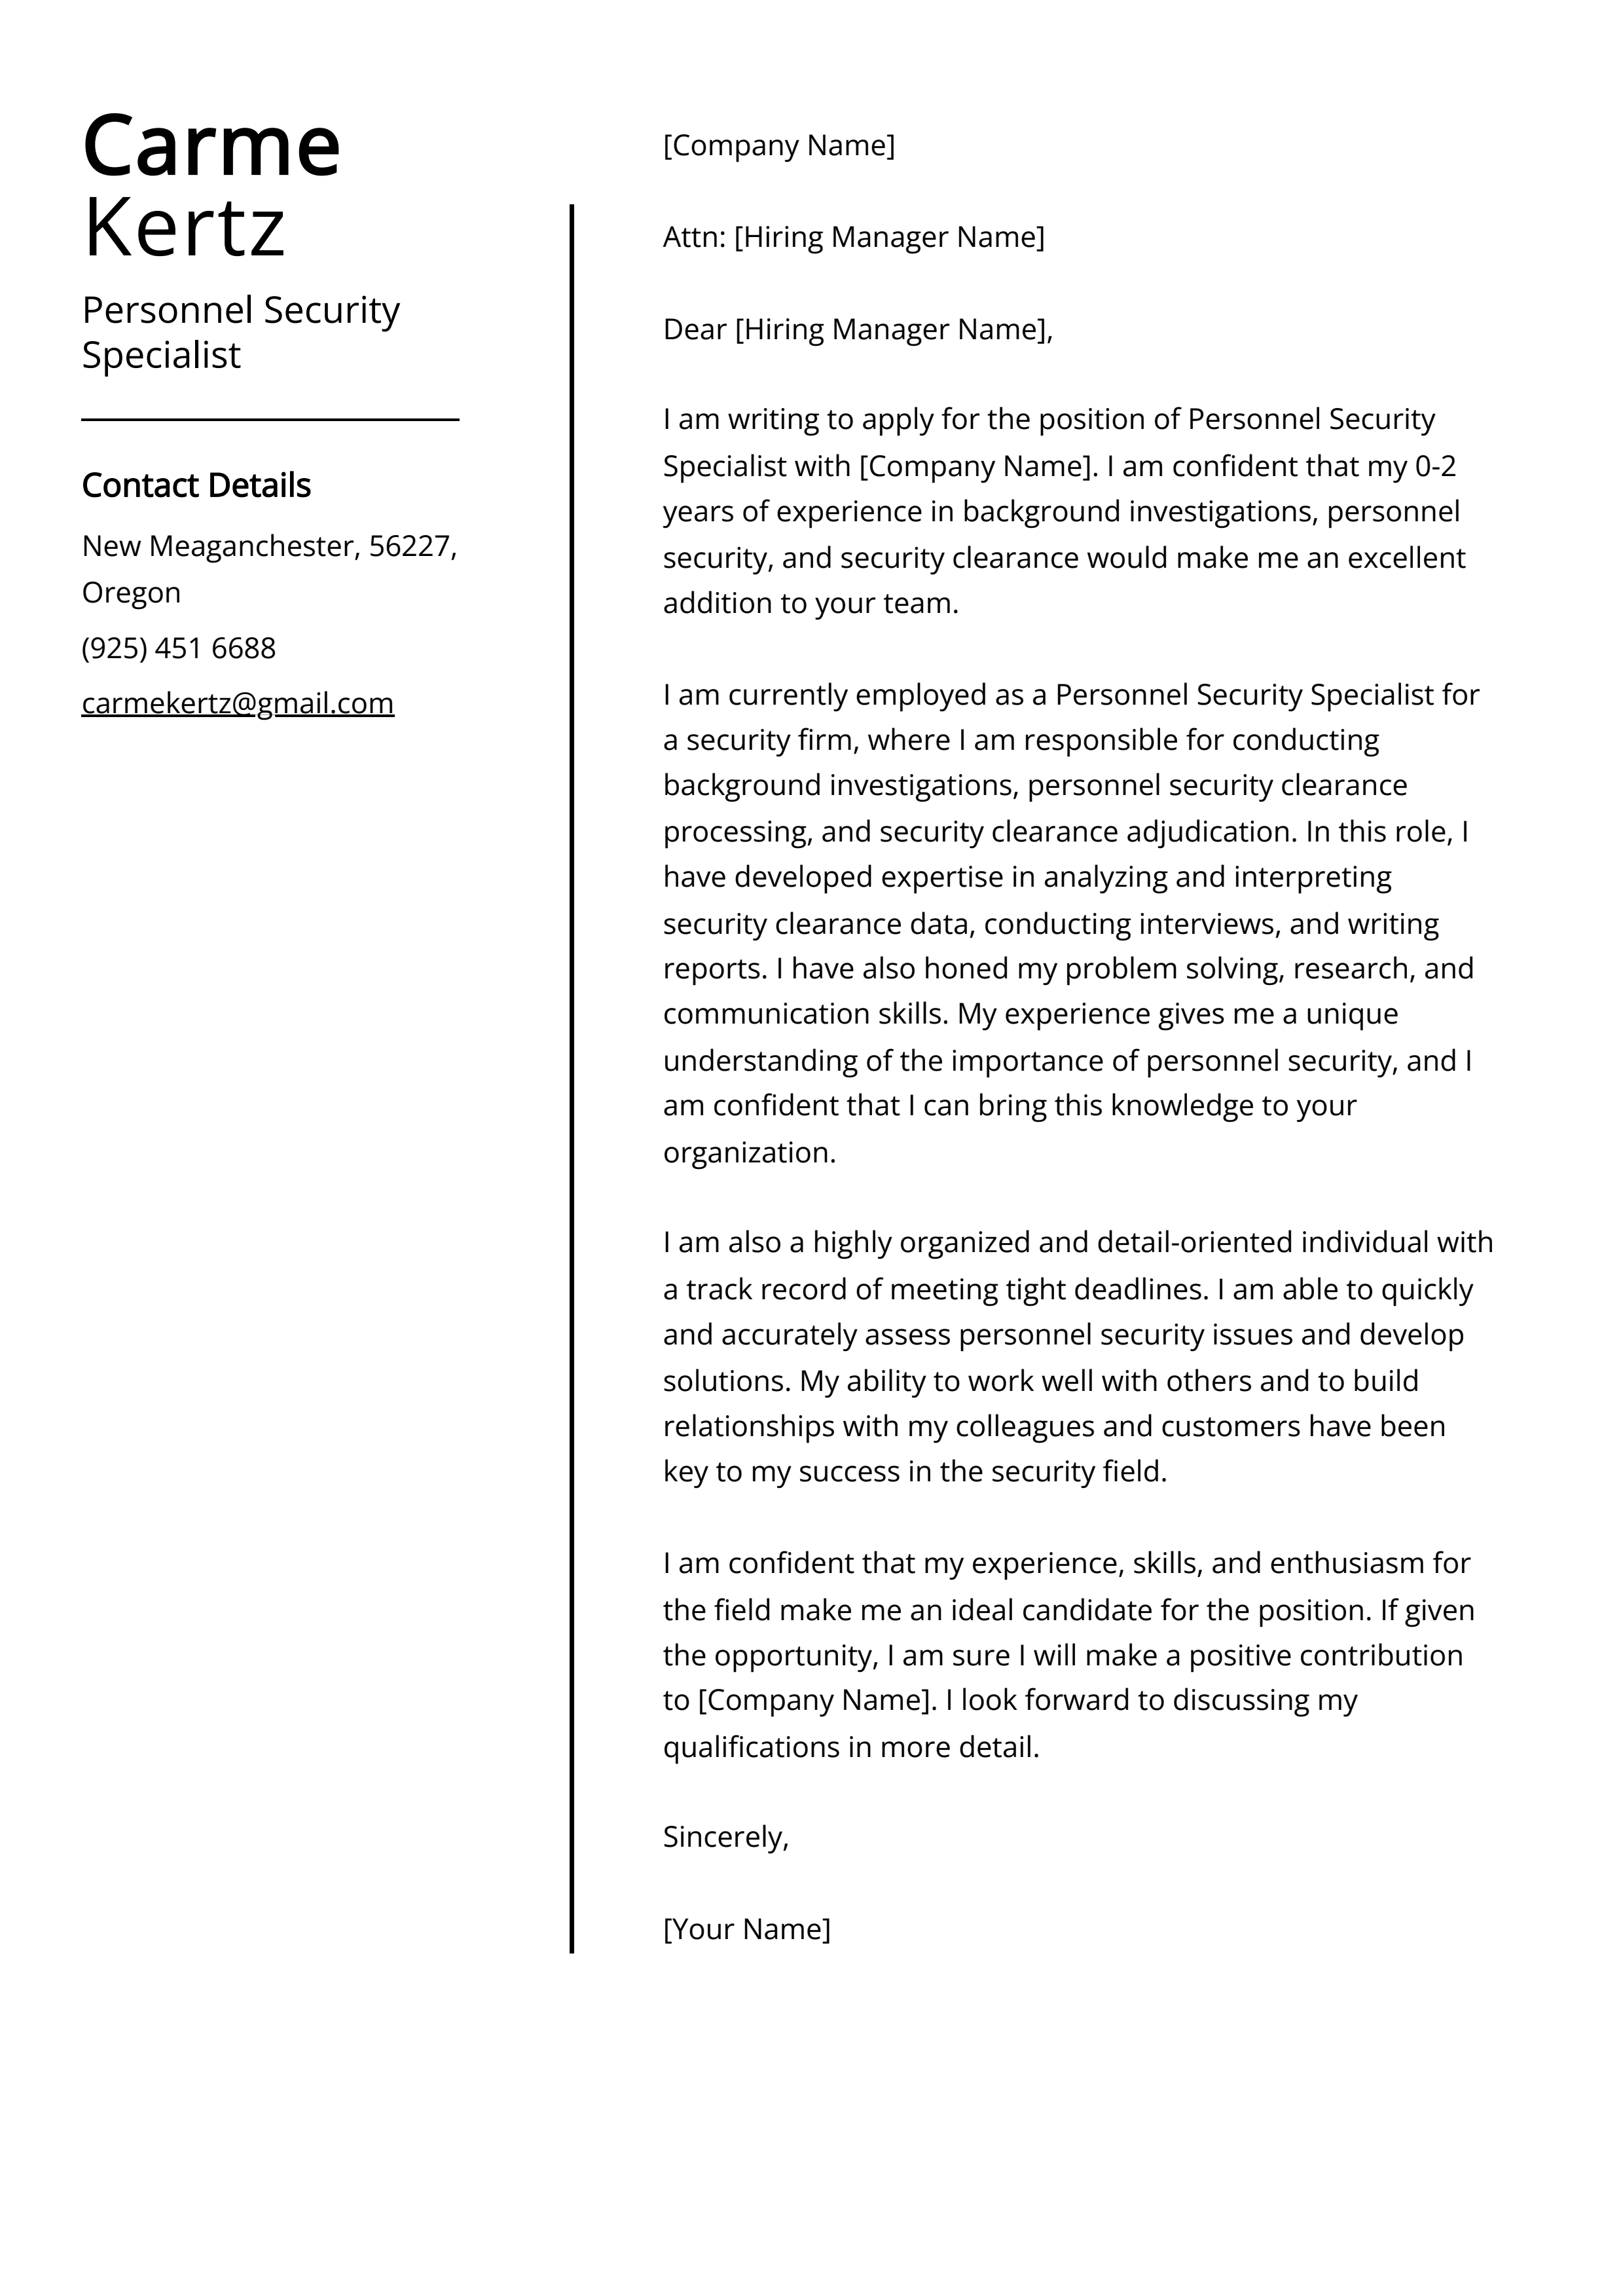 Personnel Security Specialist Cover Letter Example